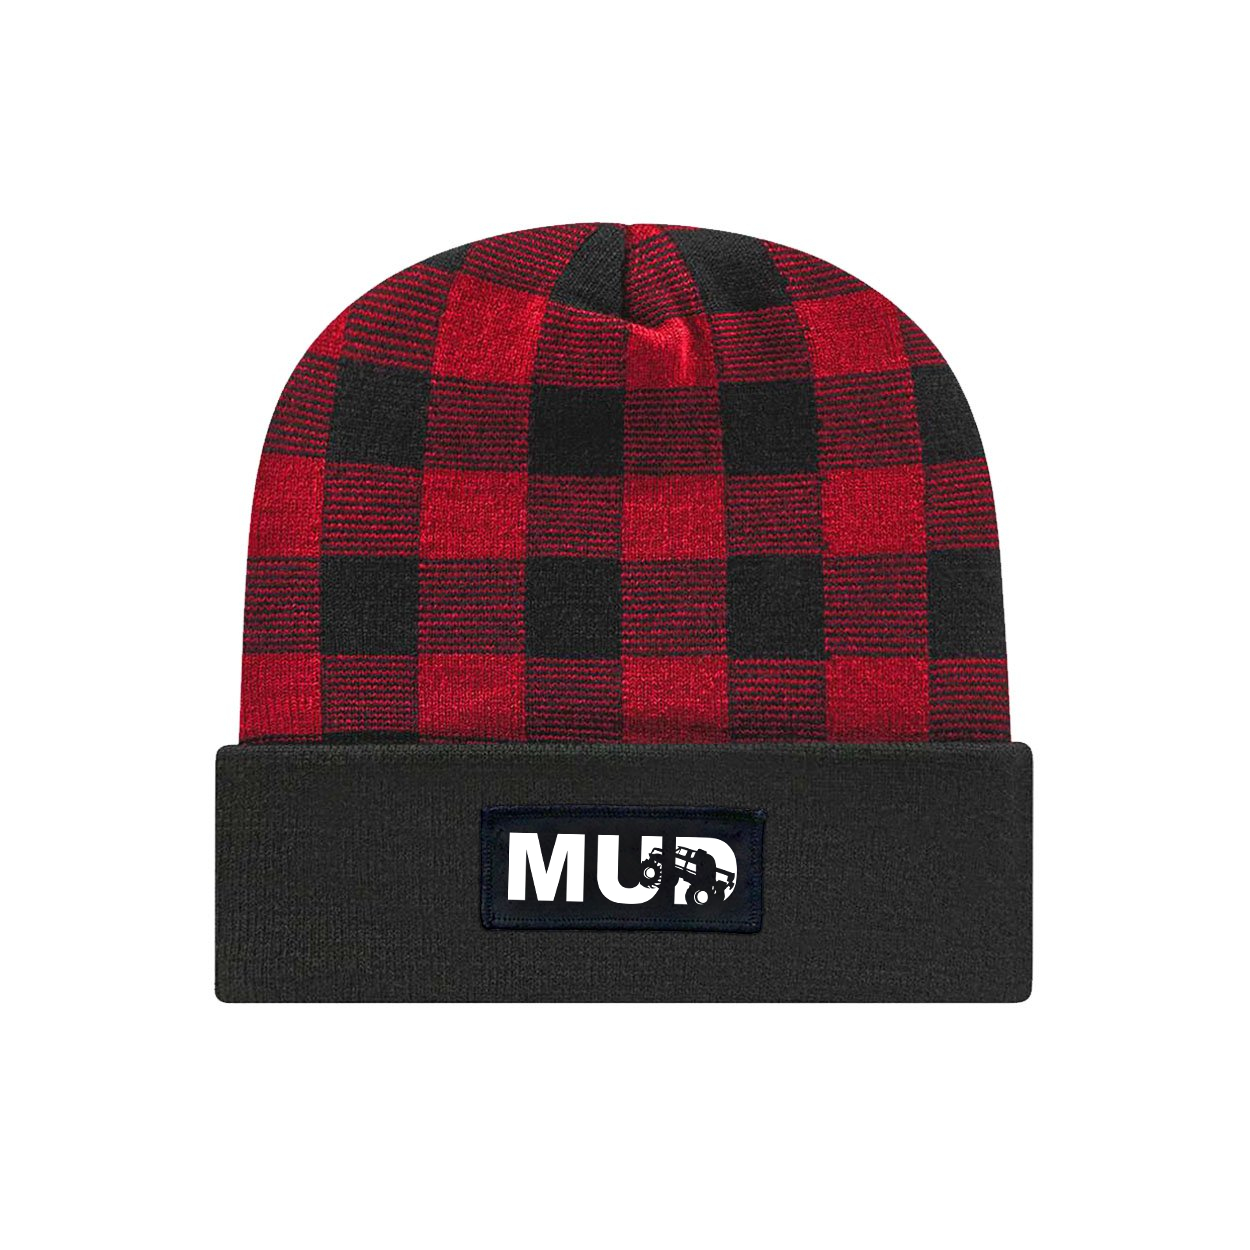 Mud Truck Logo Night Out Woven Patch Roll Up Plaid Beanie Black/True Red (White Logo)